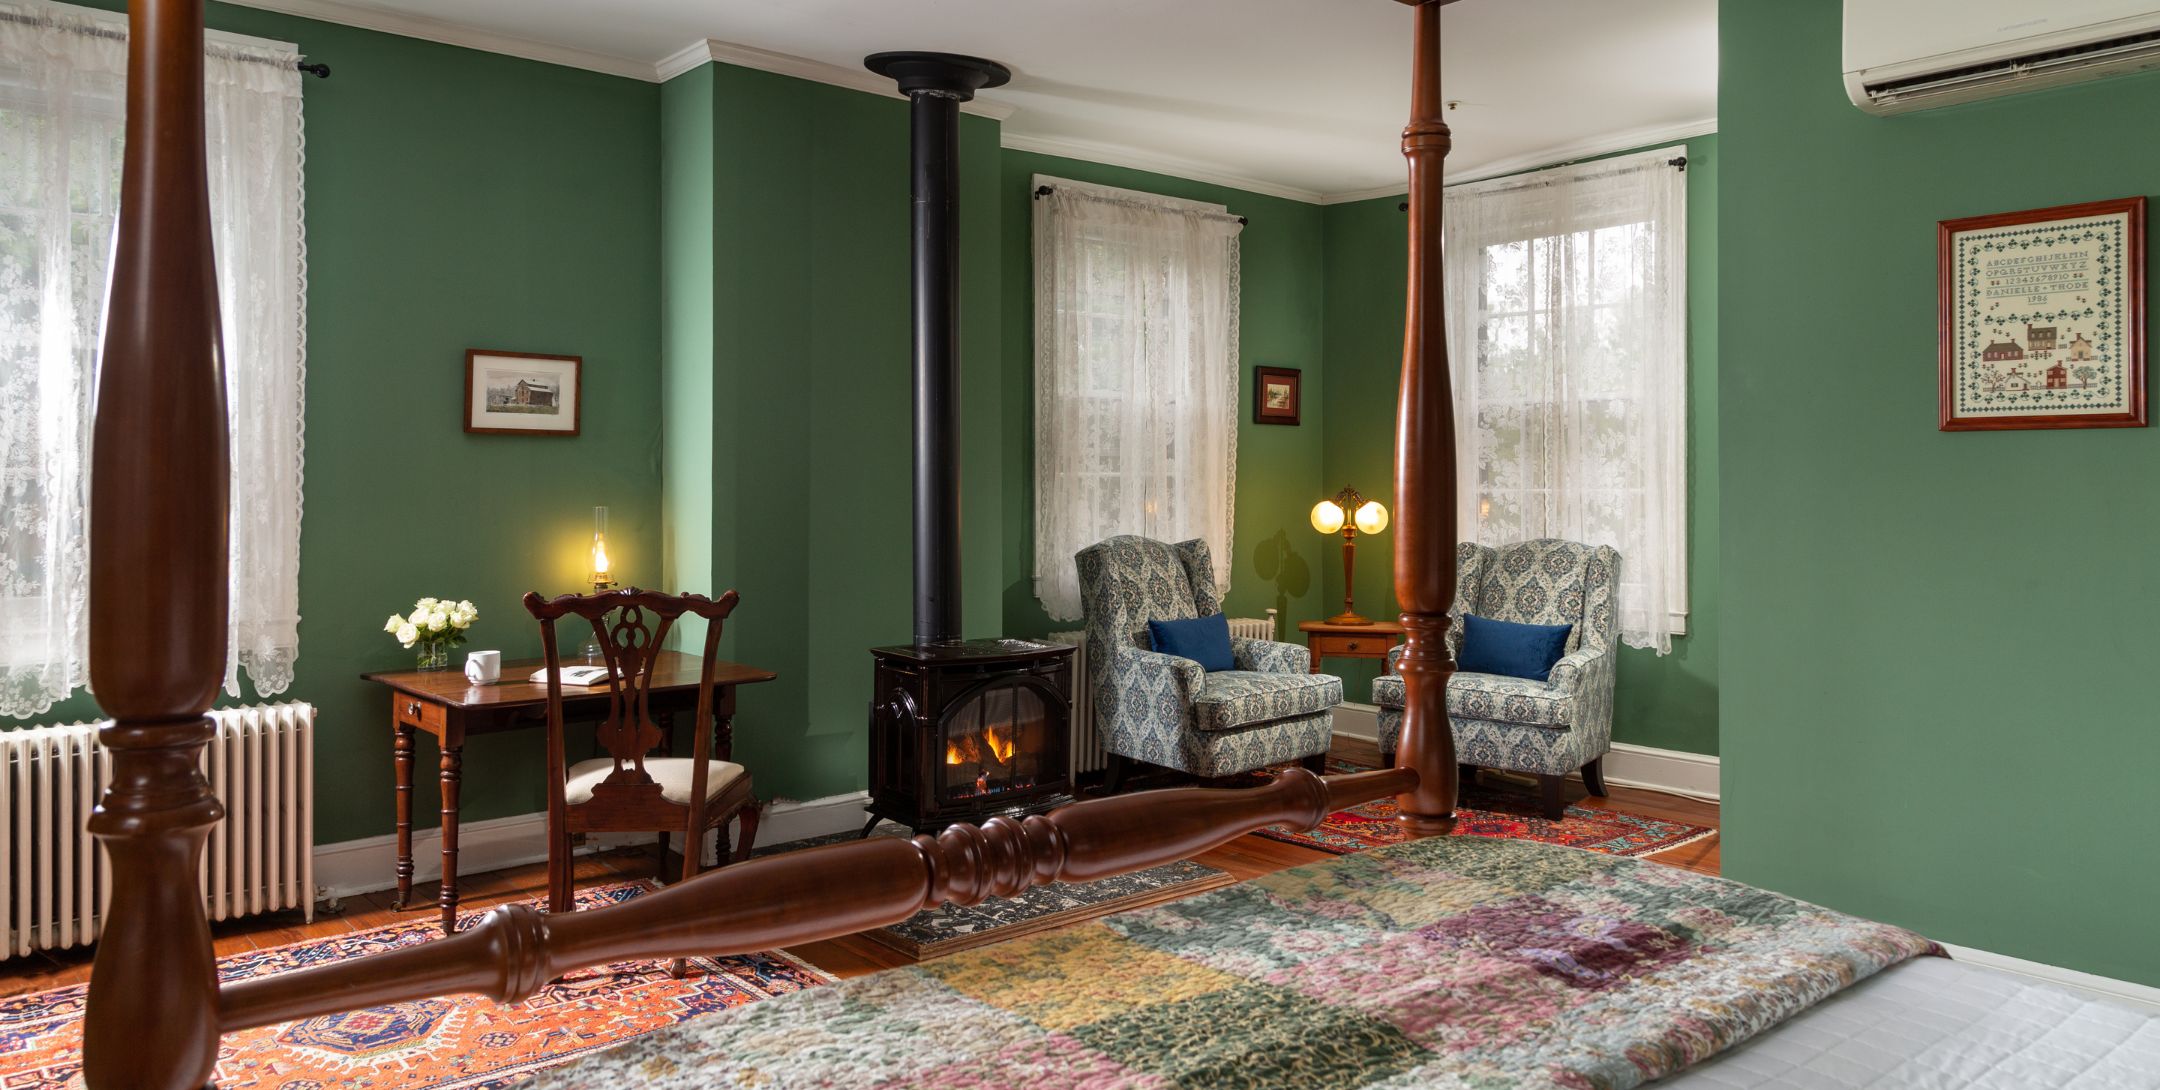 Guest room with deep green walls, hardwood floors, white lace curtains, two wing chairs and four poster bed